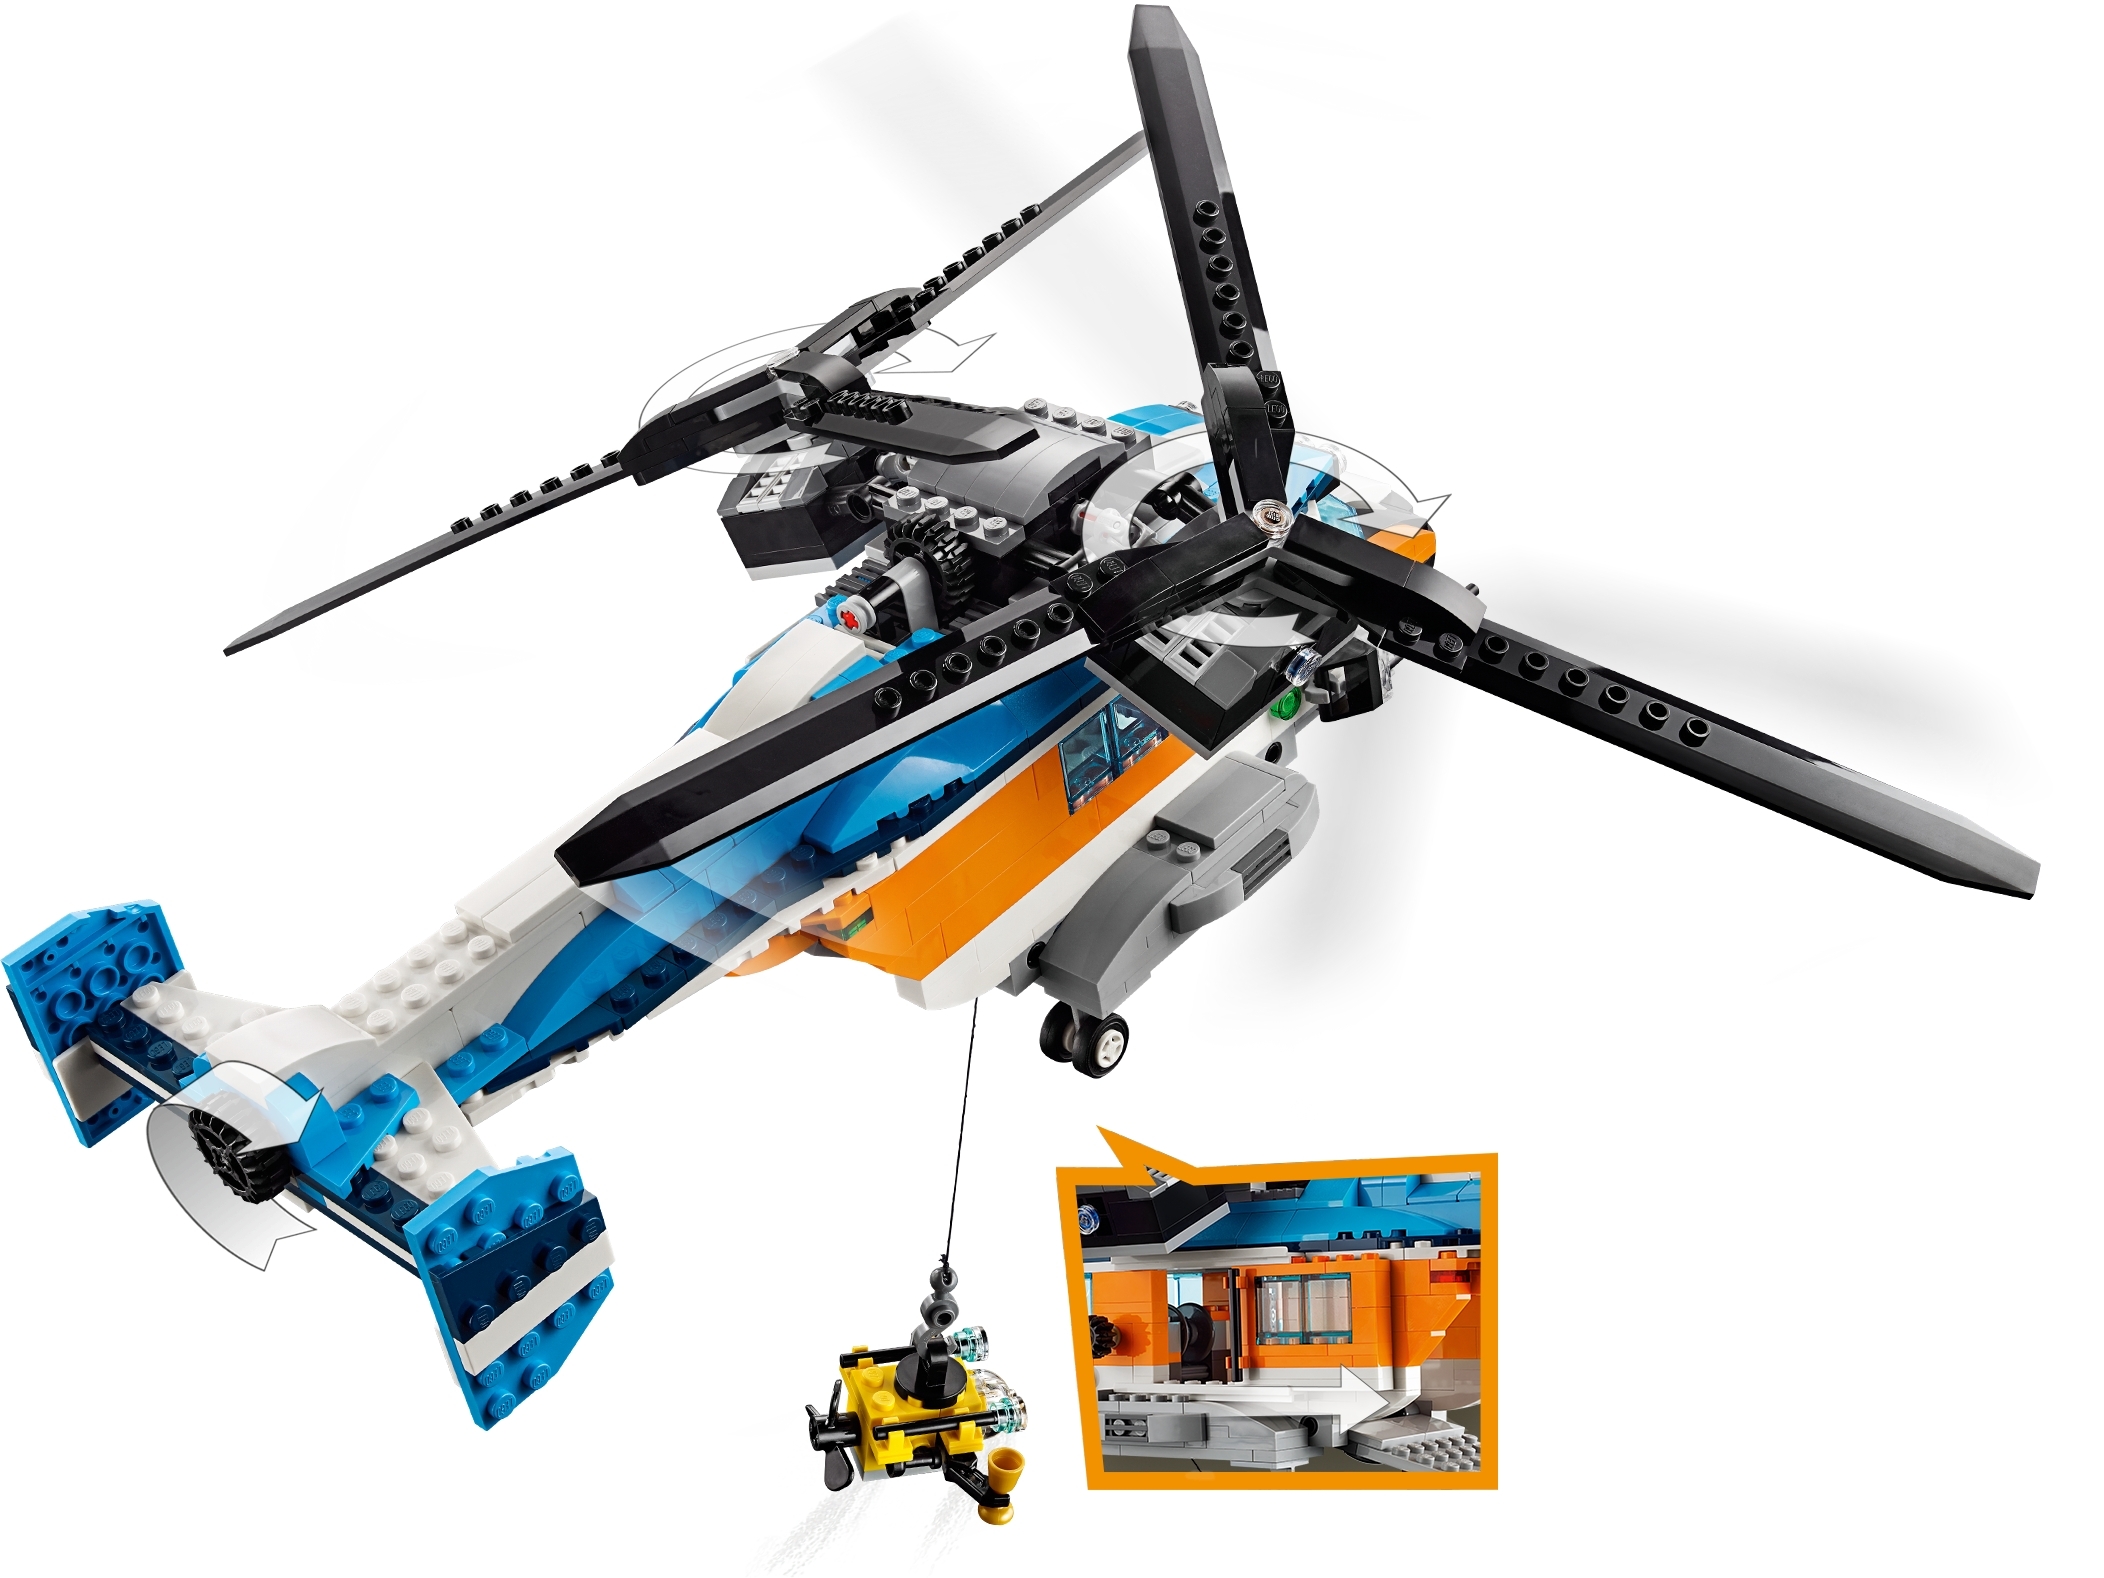 Twin-Rotor Helicopter 31096 Creator 3-in-1 | Buy at the Official Shop US